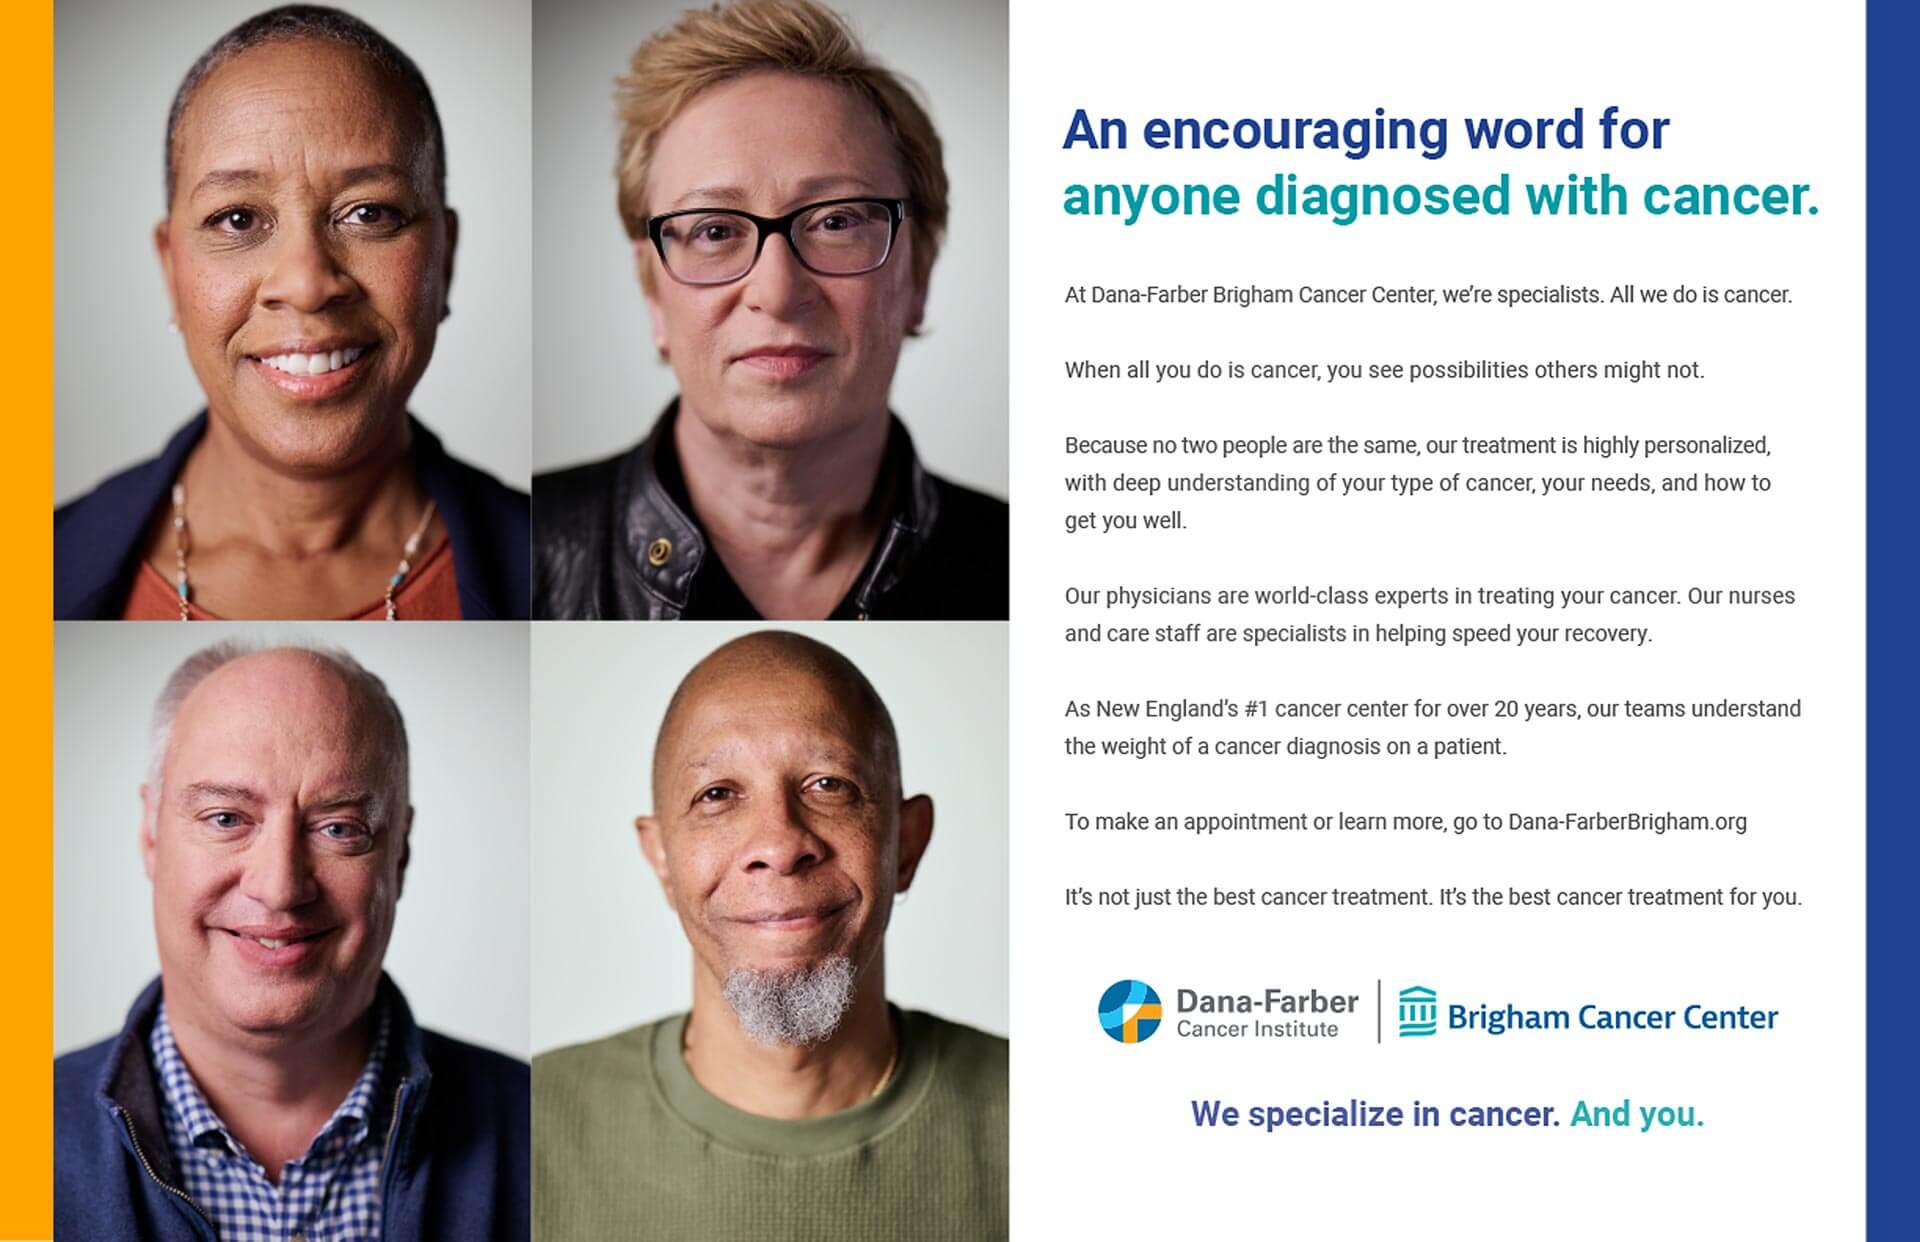 Dana-Farber Brigham Cancer Center. An enouraging word for anyone diagnosed with cancer.